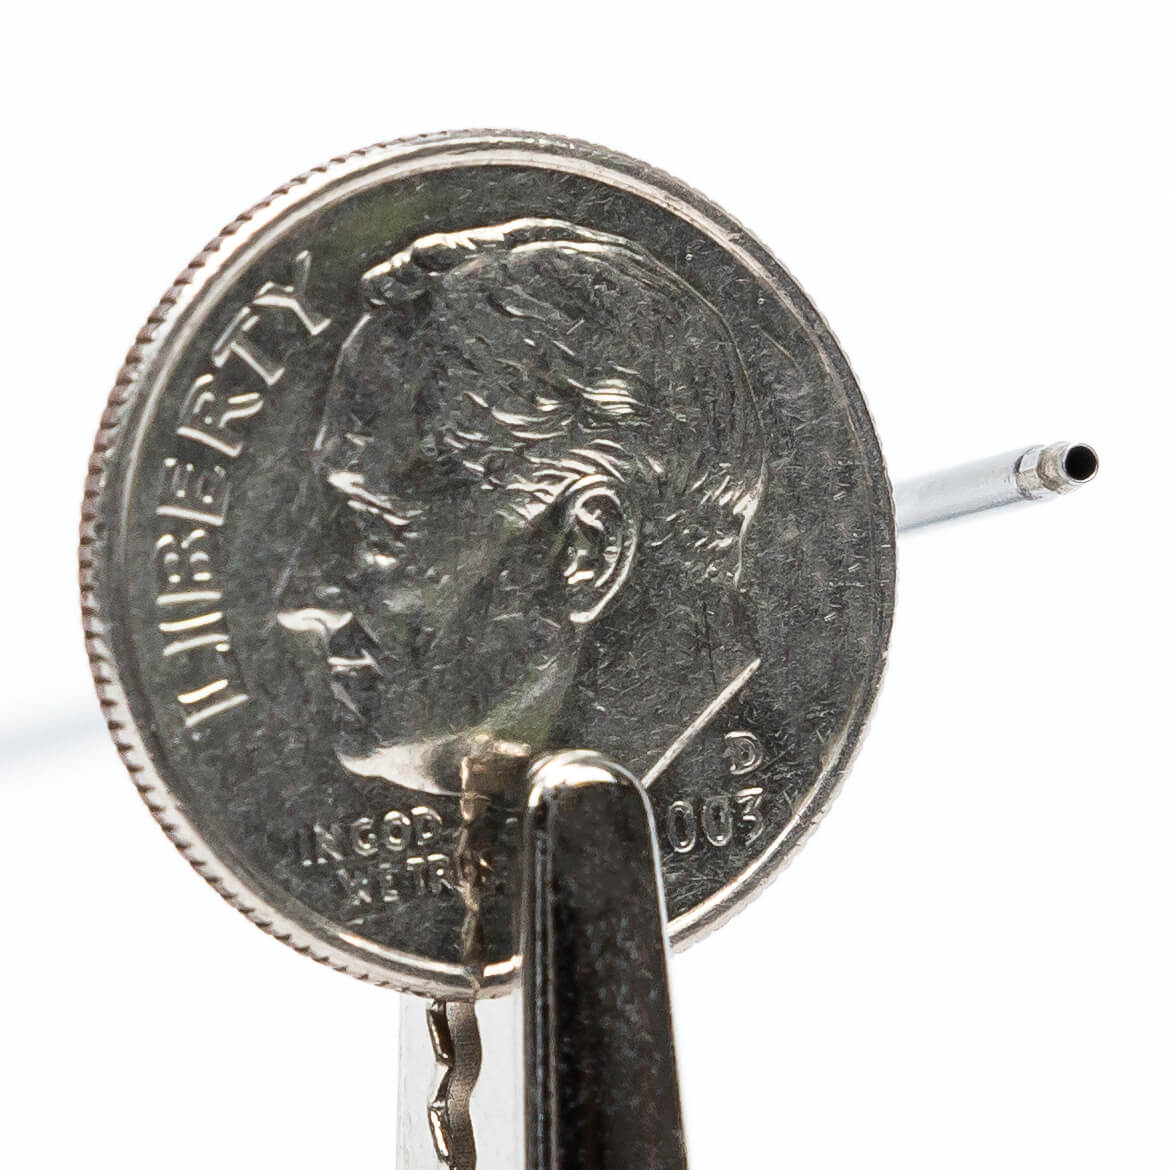 Small bore, double walled, stainless steel, vacuum insulated sleeve compared to the size of a U.S. dime